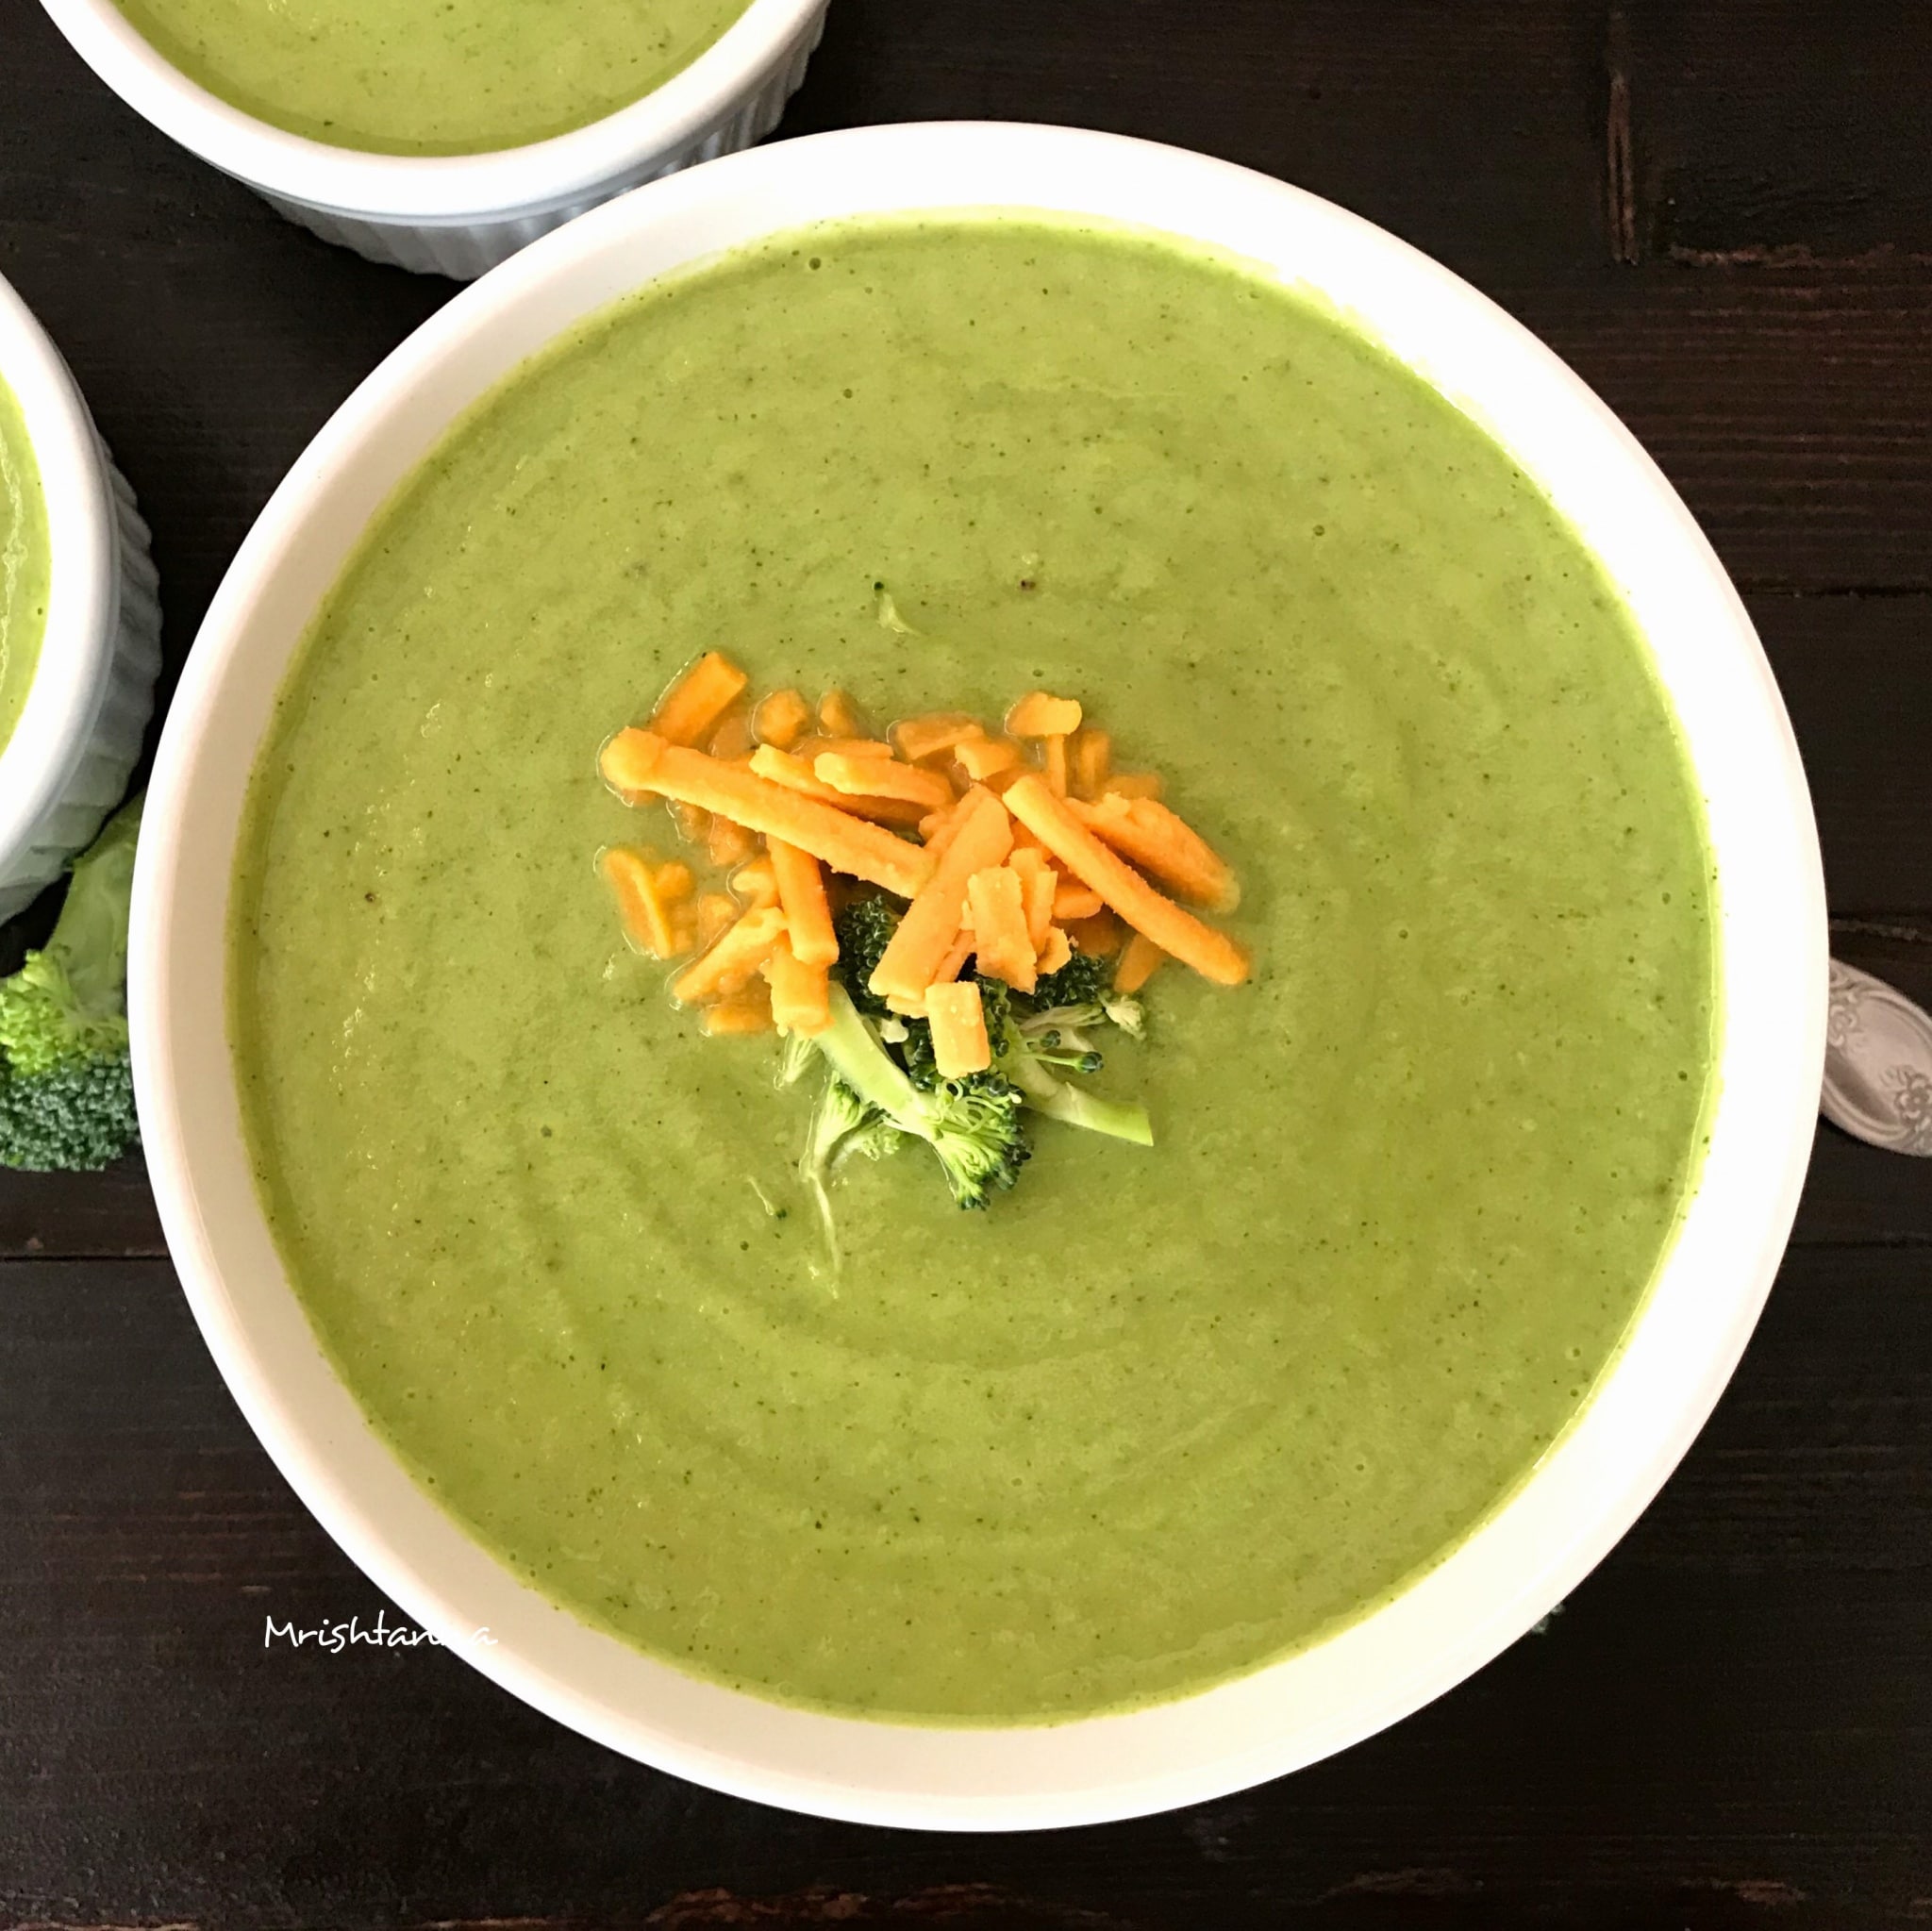 A bowl of vegan broccoli soup is on the table